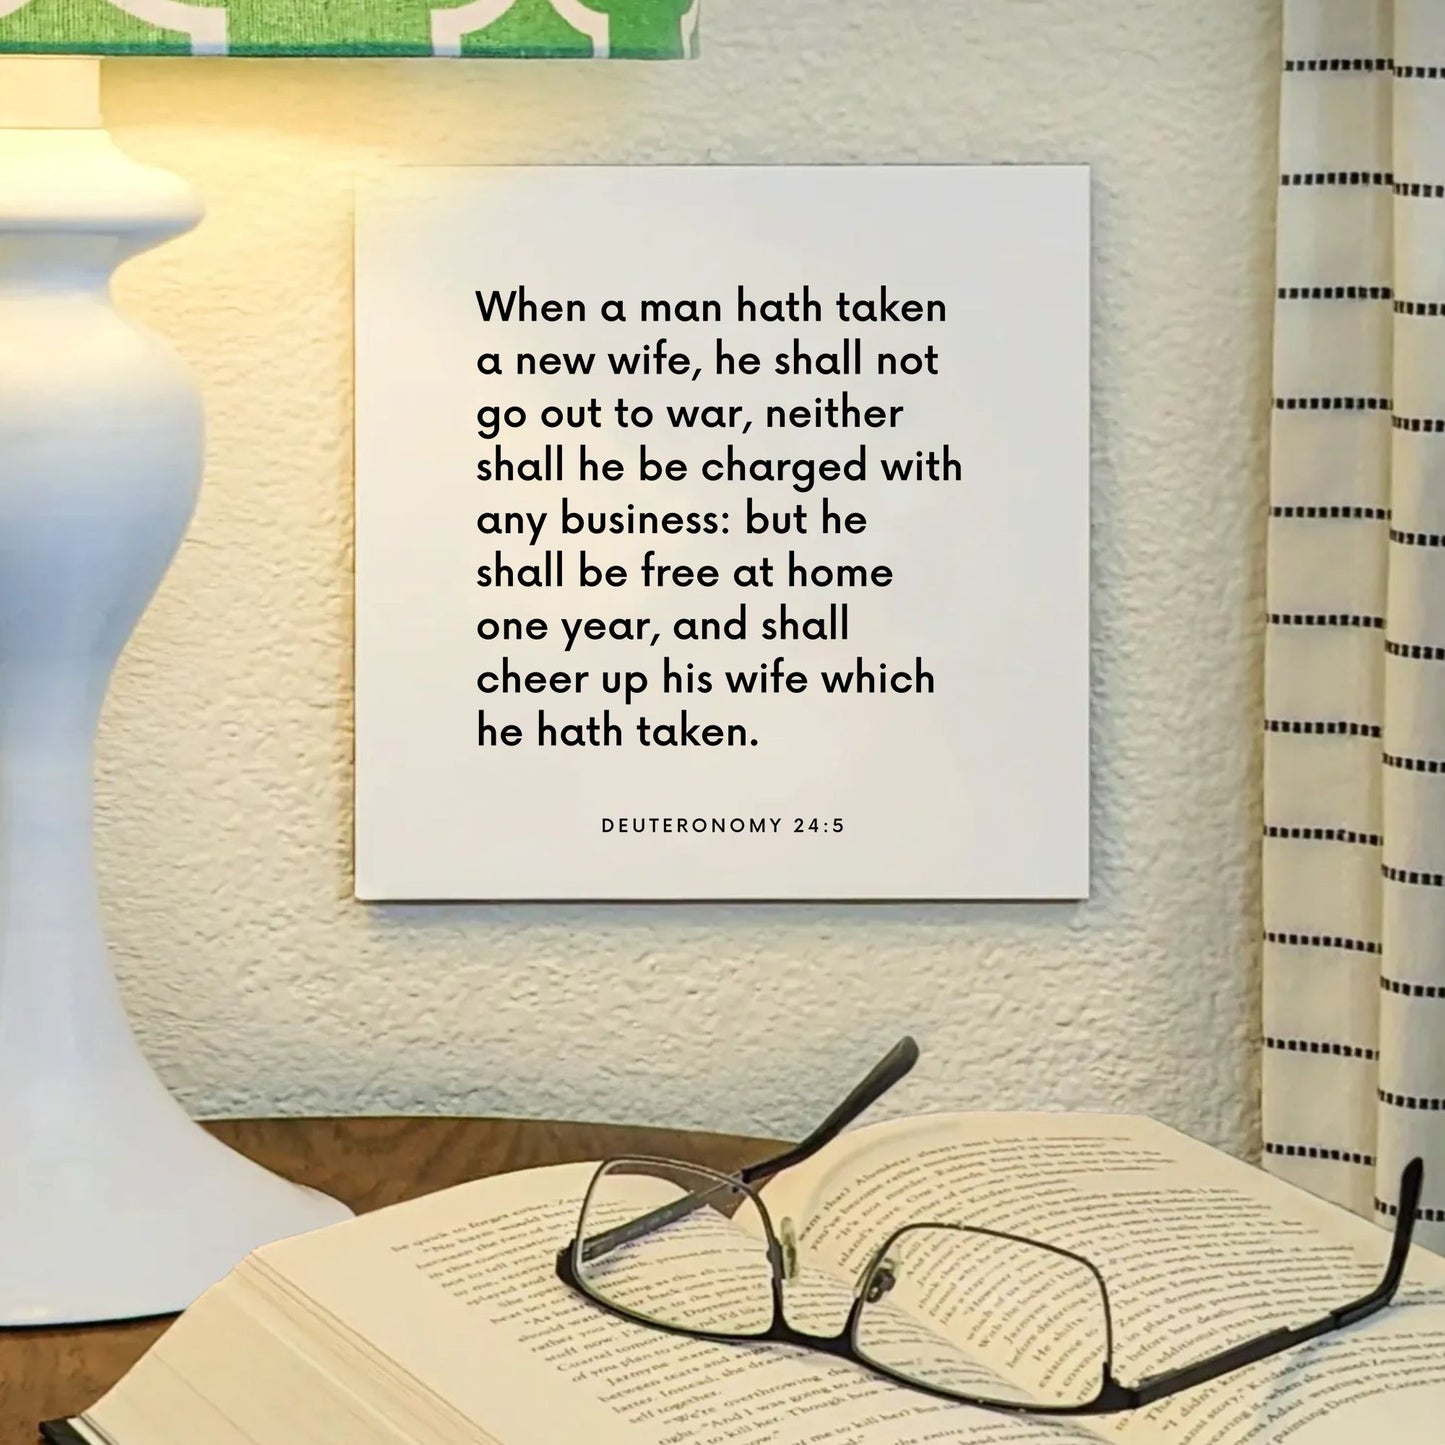 Lamp mouting of the scripture tile for Deuteronomy 24:5 - "When a man hath taken a new wife, he shall not go out to war"